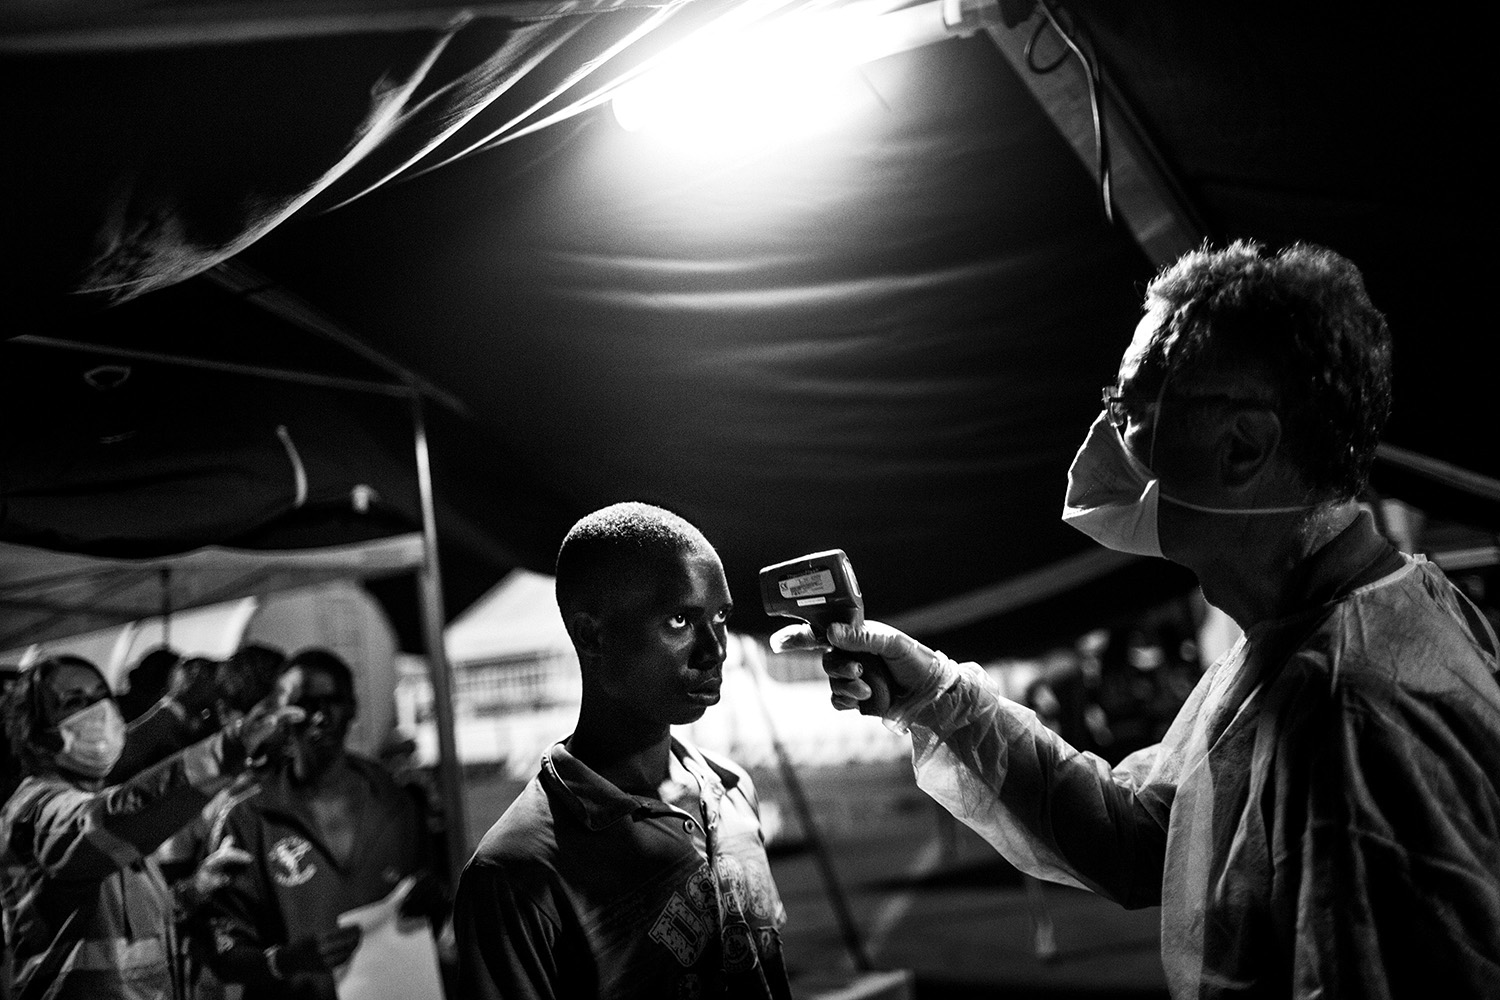 An Italian Red Cross doctor measures - with an electronic thermometer - the temperature of a Sub-Saharan boy, during the medical check in the tent set up at the dock in the port of Messina (Italy). On July 31st 2015, 392 people were disembarked from the Italian Coast Guard ship Diciotti at the Sicilian port of Messina. Most of the people came from Sub-Saharan countries like Gambia, Senegal, Mali, Ivory Coast, Togo, Ghana, Cameroon, Nigeria, Burkina Faso, Guinea Conakry and Guinea Bissau. There were also refugees coming from Sudan, Somalia and Libya.